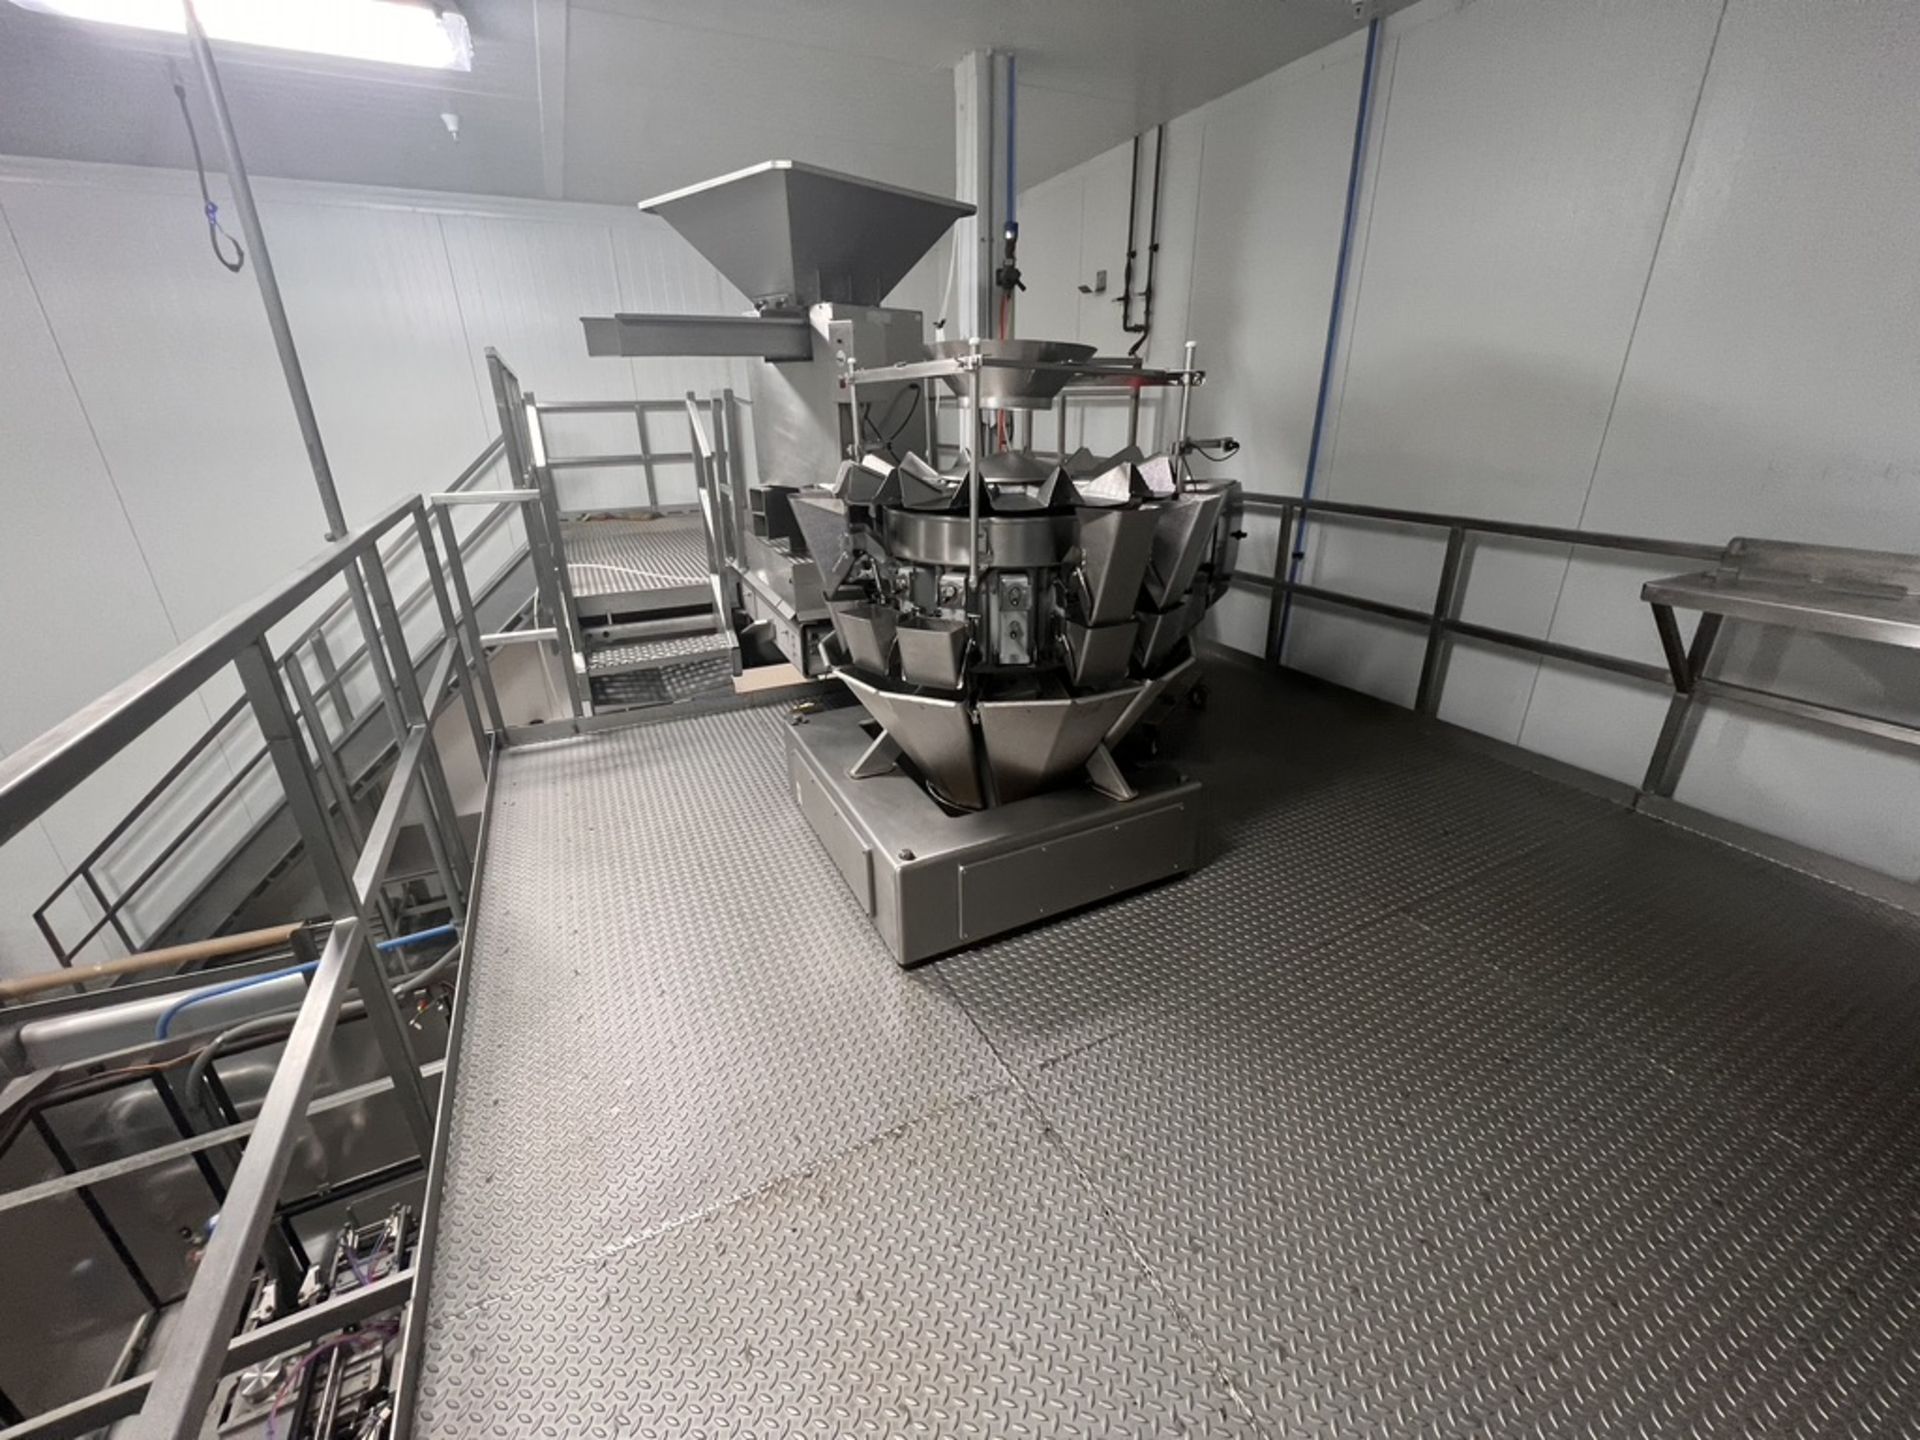 VC999 14-HEAD MULTI-WEIGHER, MODEL MULTIHEAD WEIGHER (SUBJECT TO BULK BID) - Image 6 of 8